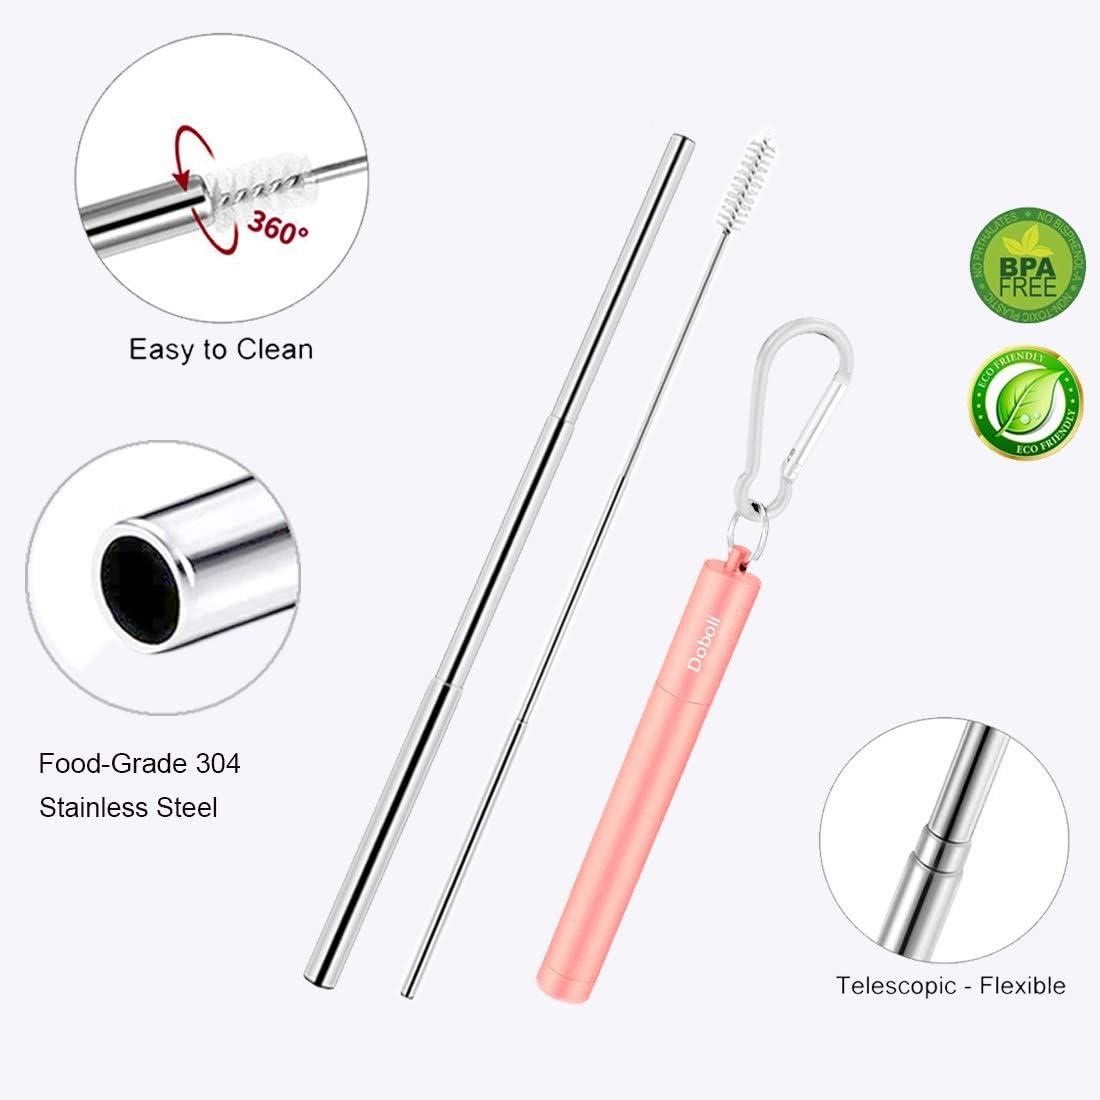 4-PACK REUSABLE COLLAPSIBLE SILICONE STRAWS